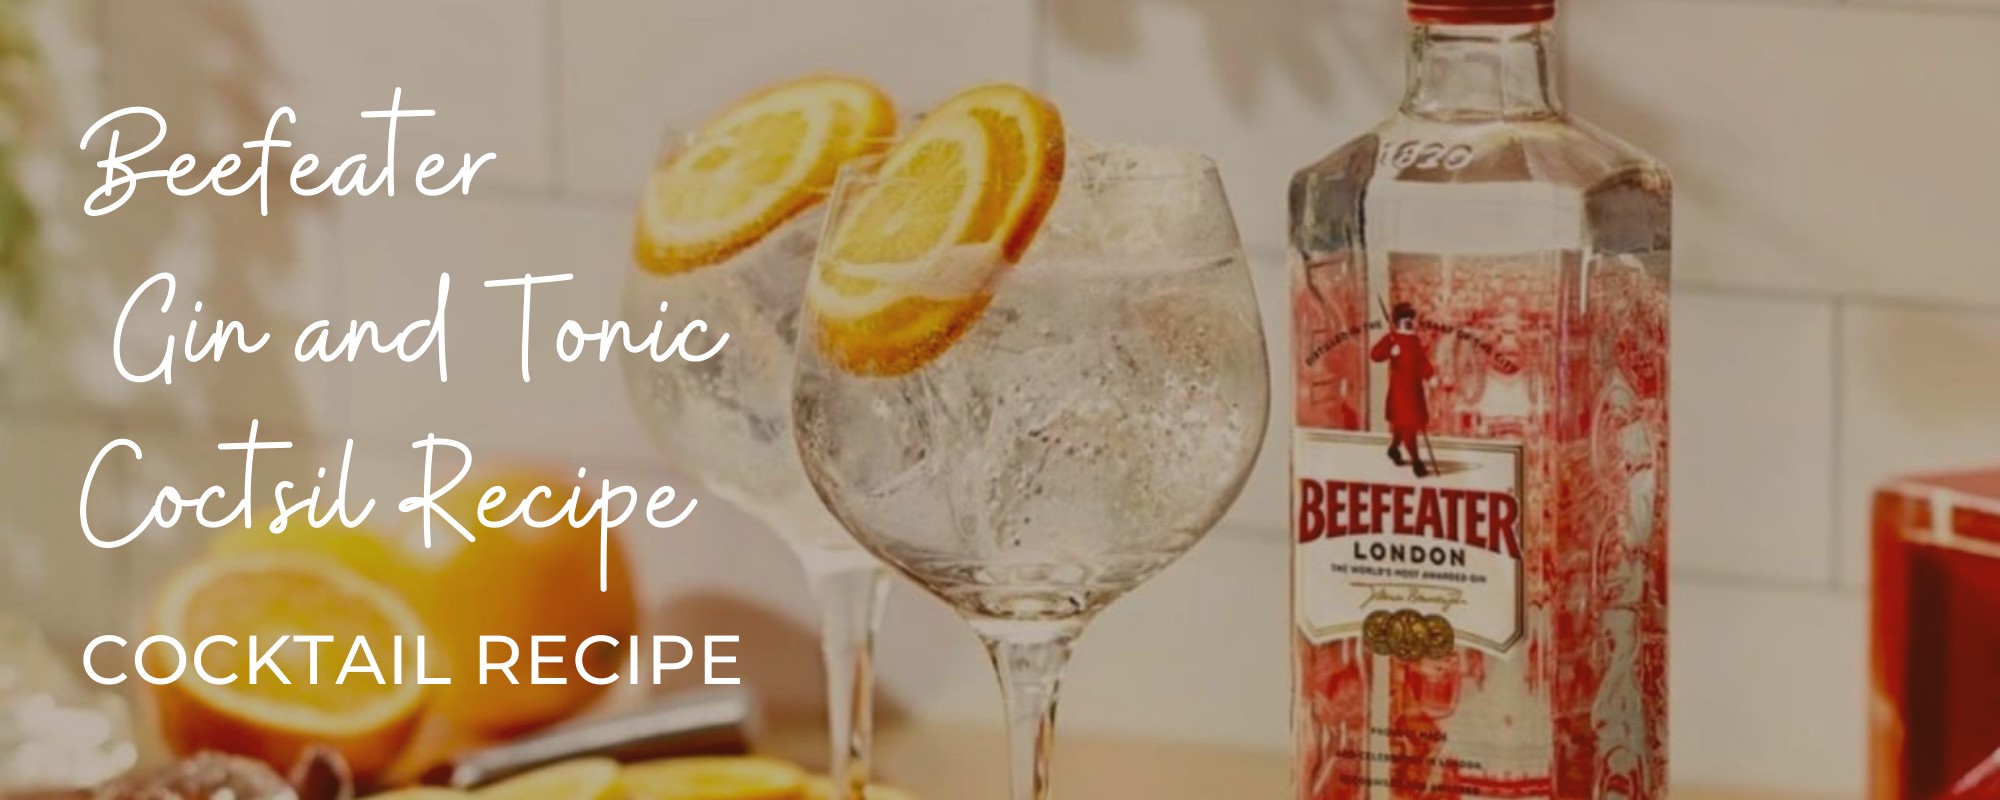 Beefeater D.I.Y Gin and Tonic Cocktail Recipe